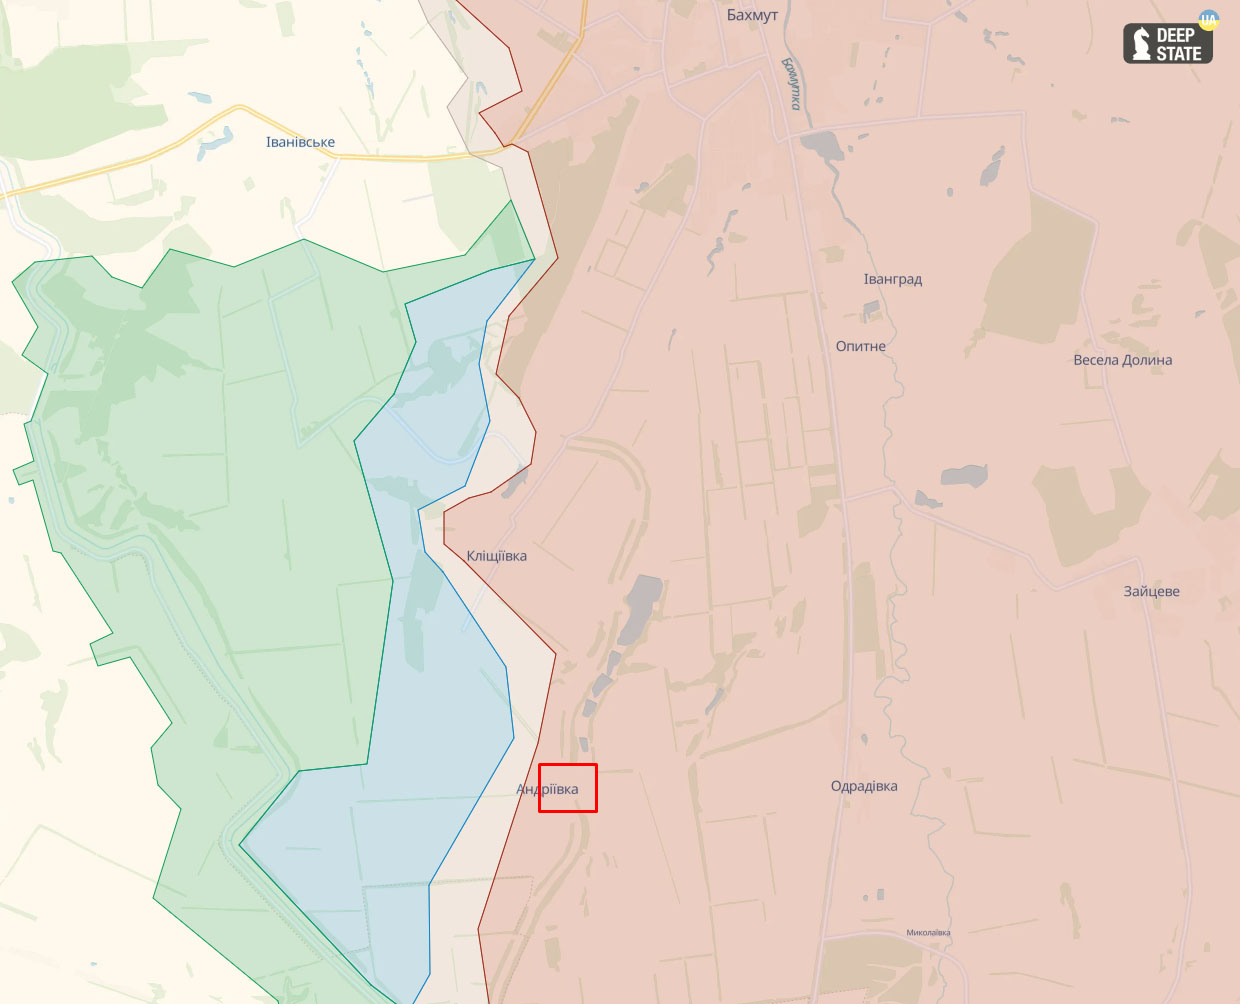 The battle location on the map is approximately along the frontline, Defense Express